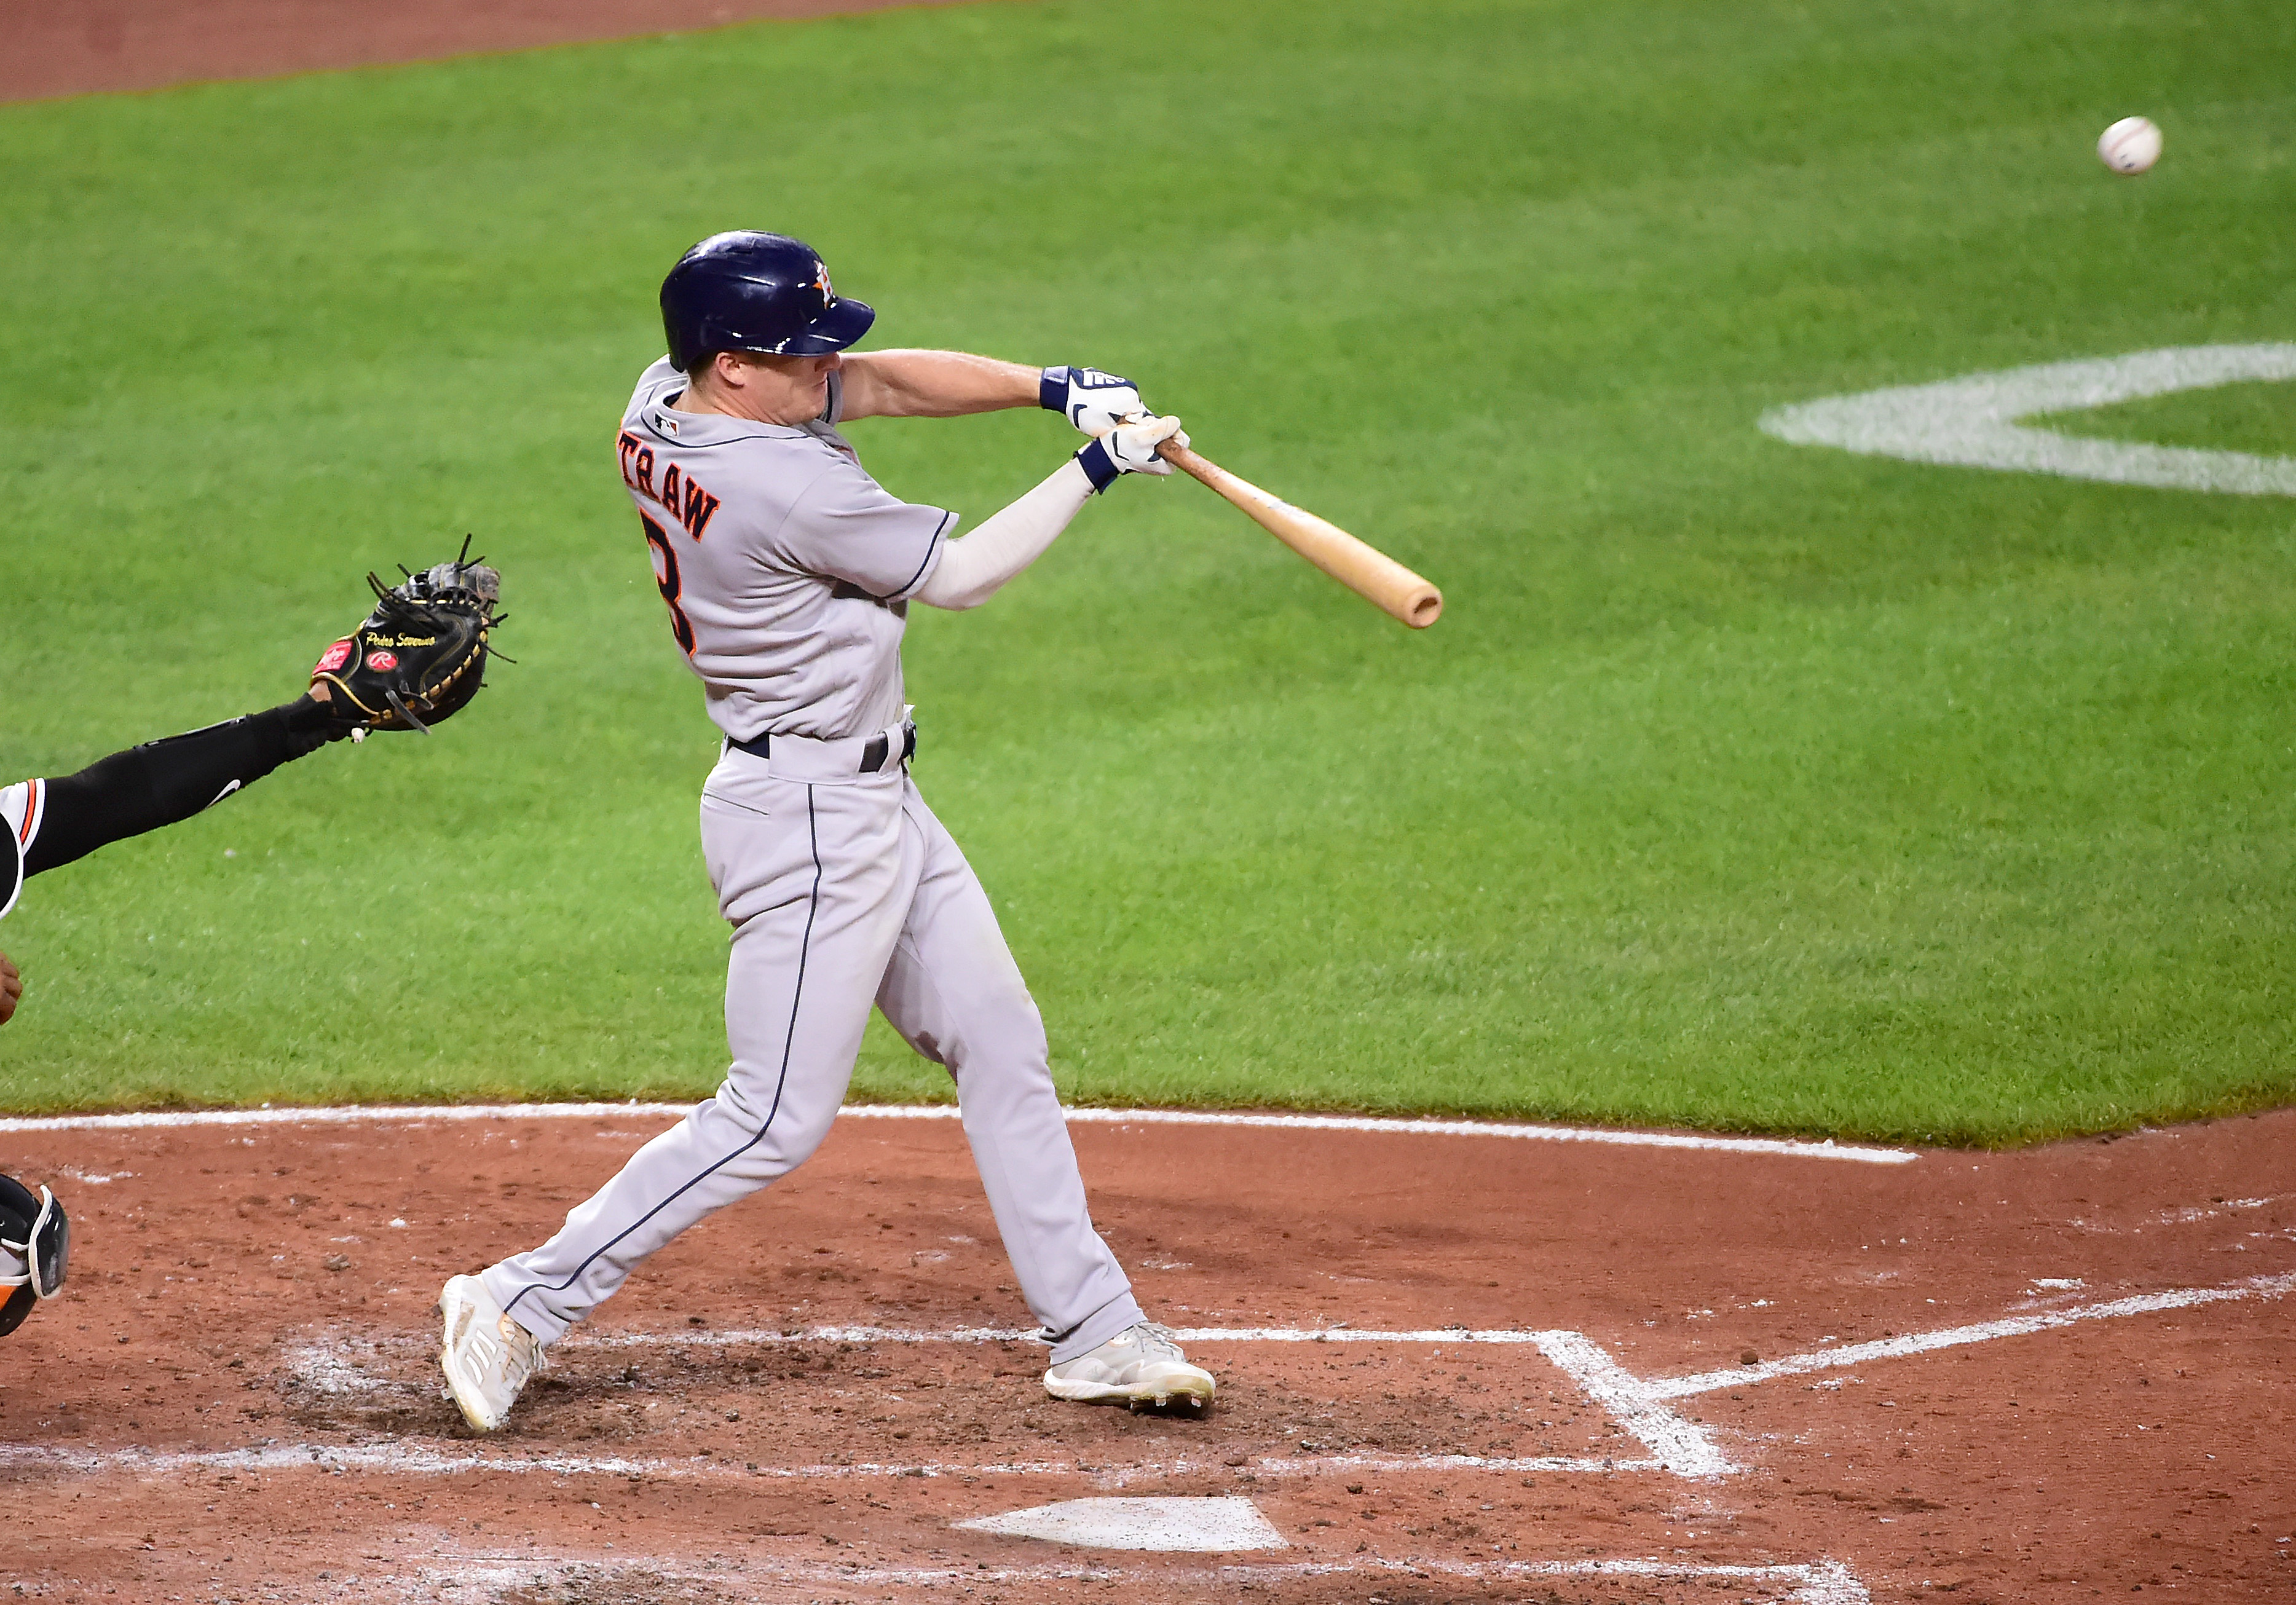 Jun 22, 2021; Baltimore, Maryland, USA; Houston Astros outfielder Myles Straw (3) hits an RBI single in the seventh inning against the Baltimore Orioles at Oriole Park at Camden Yards. Mandatory Credit: Evan Habeeb-USA TODAY Sports